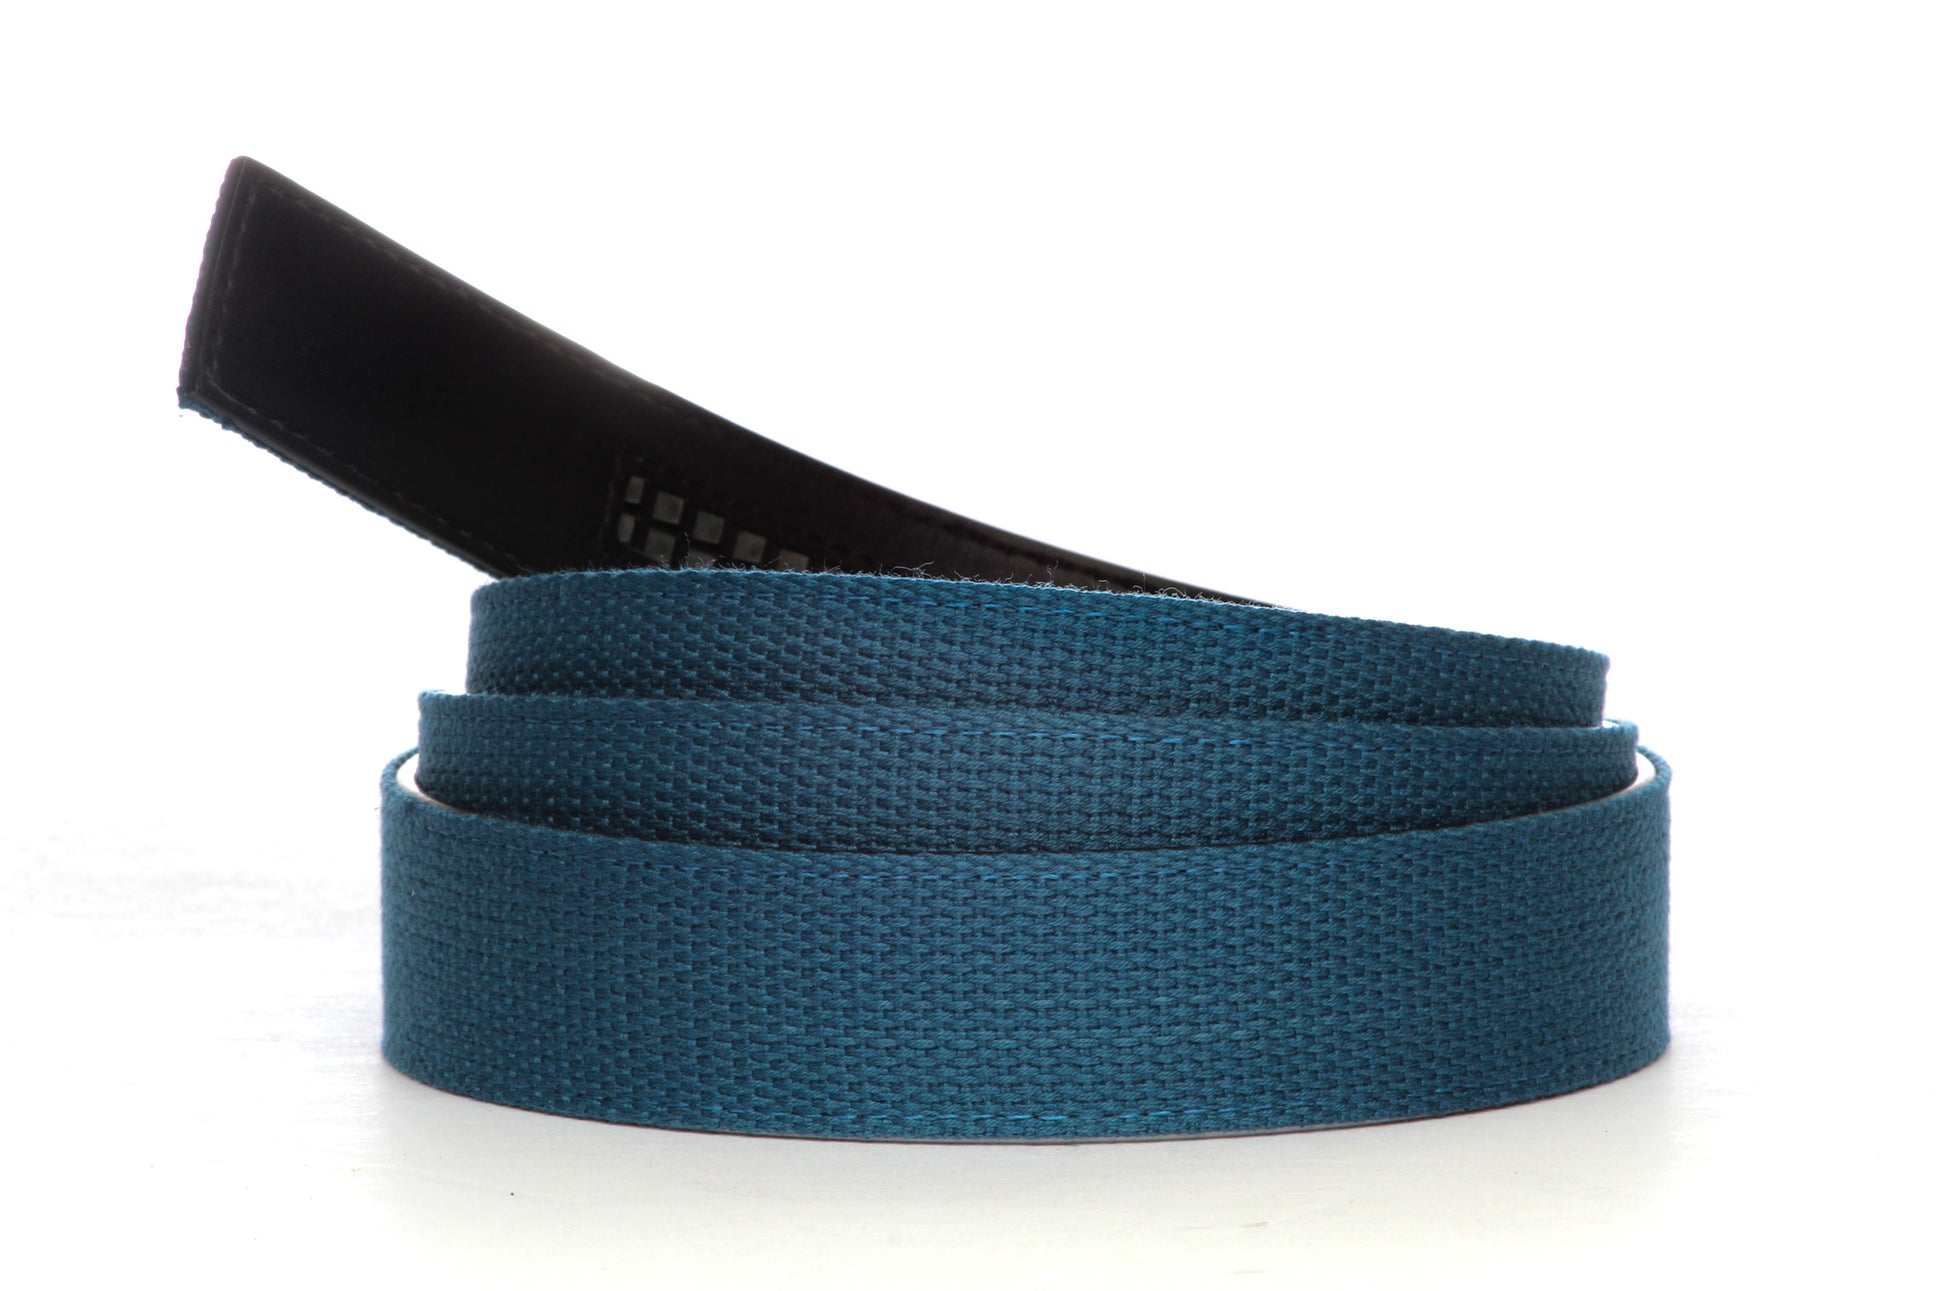 Men's canvas belt strap in marine blue with a 1.25-inch width, casual look, microfiber back